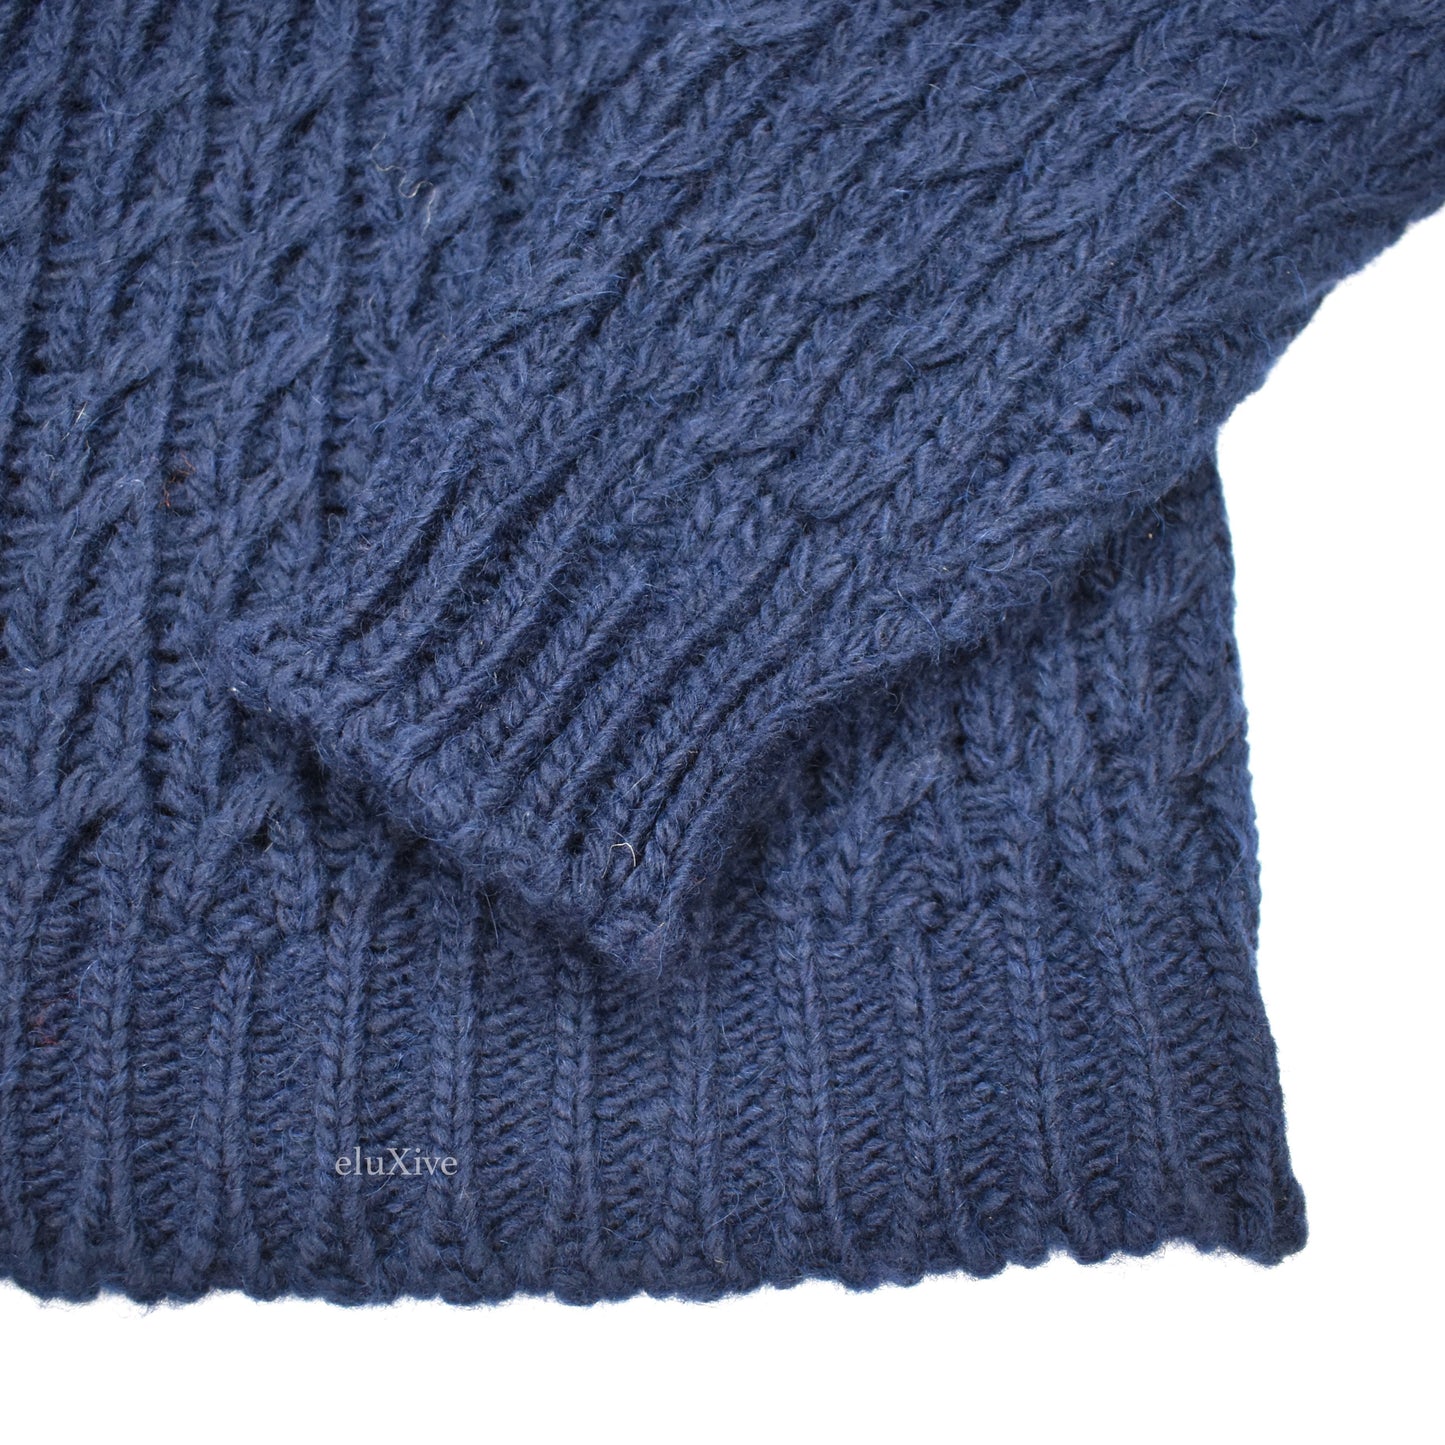 Barena - Navy Wool & Alpaca Cable Knit Sweater